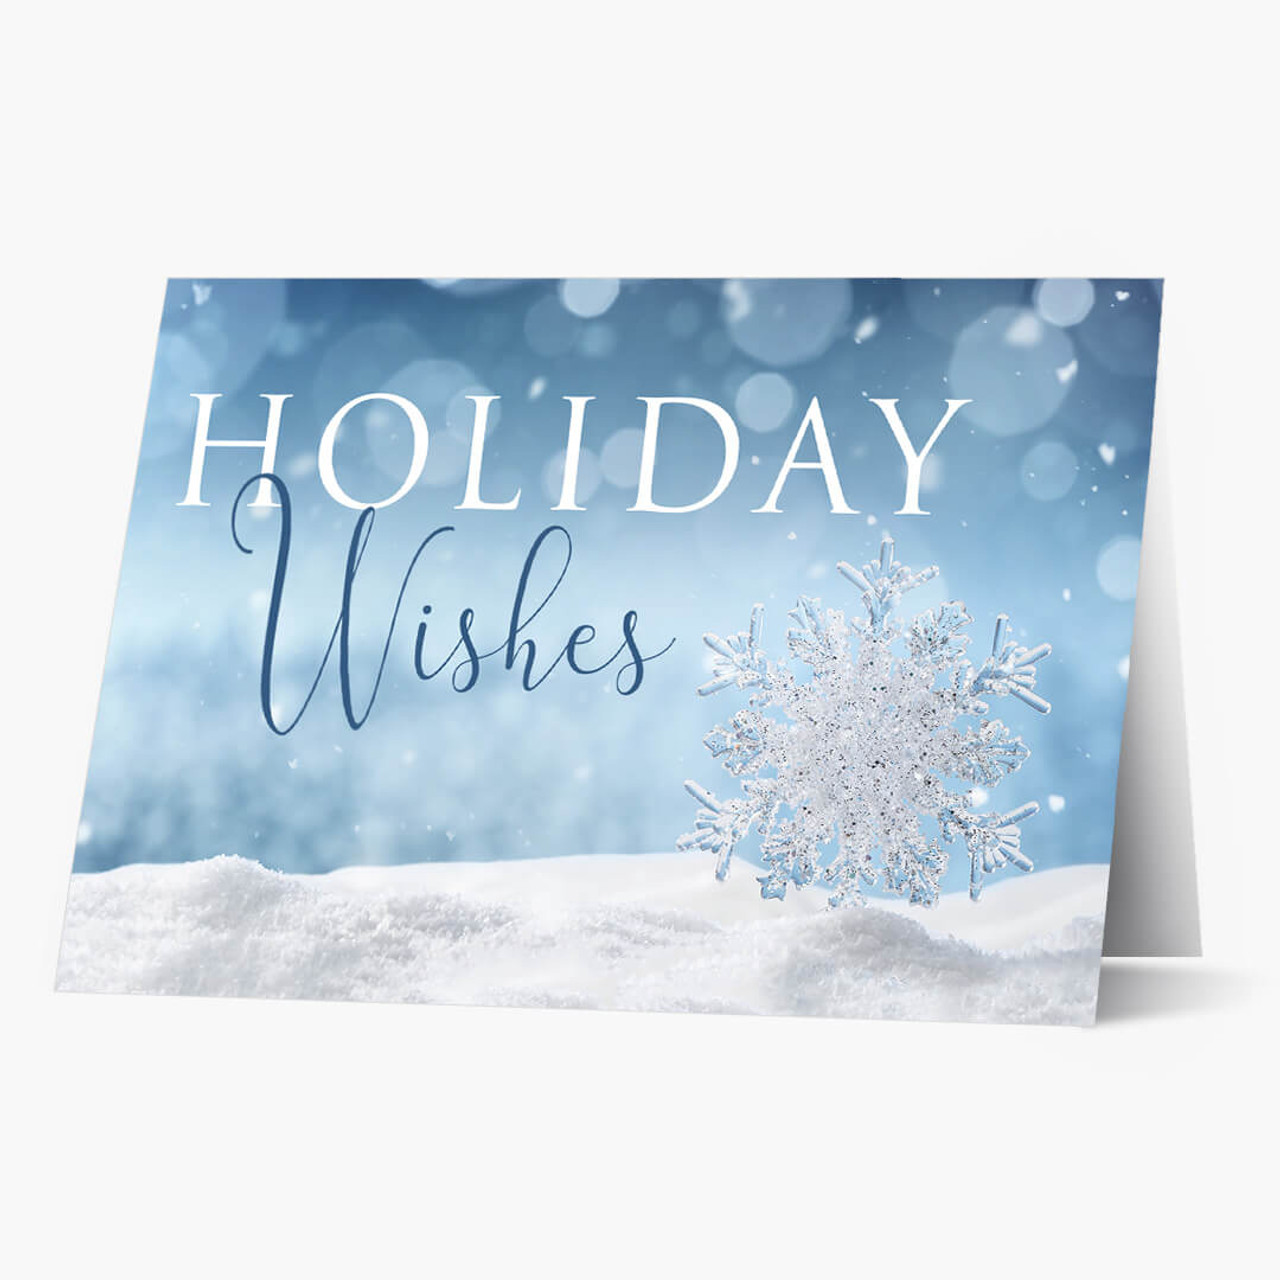 Shimmering Wishes Holiday Wishes Christmas Card